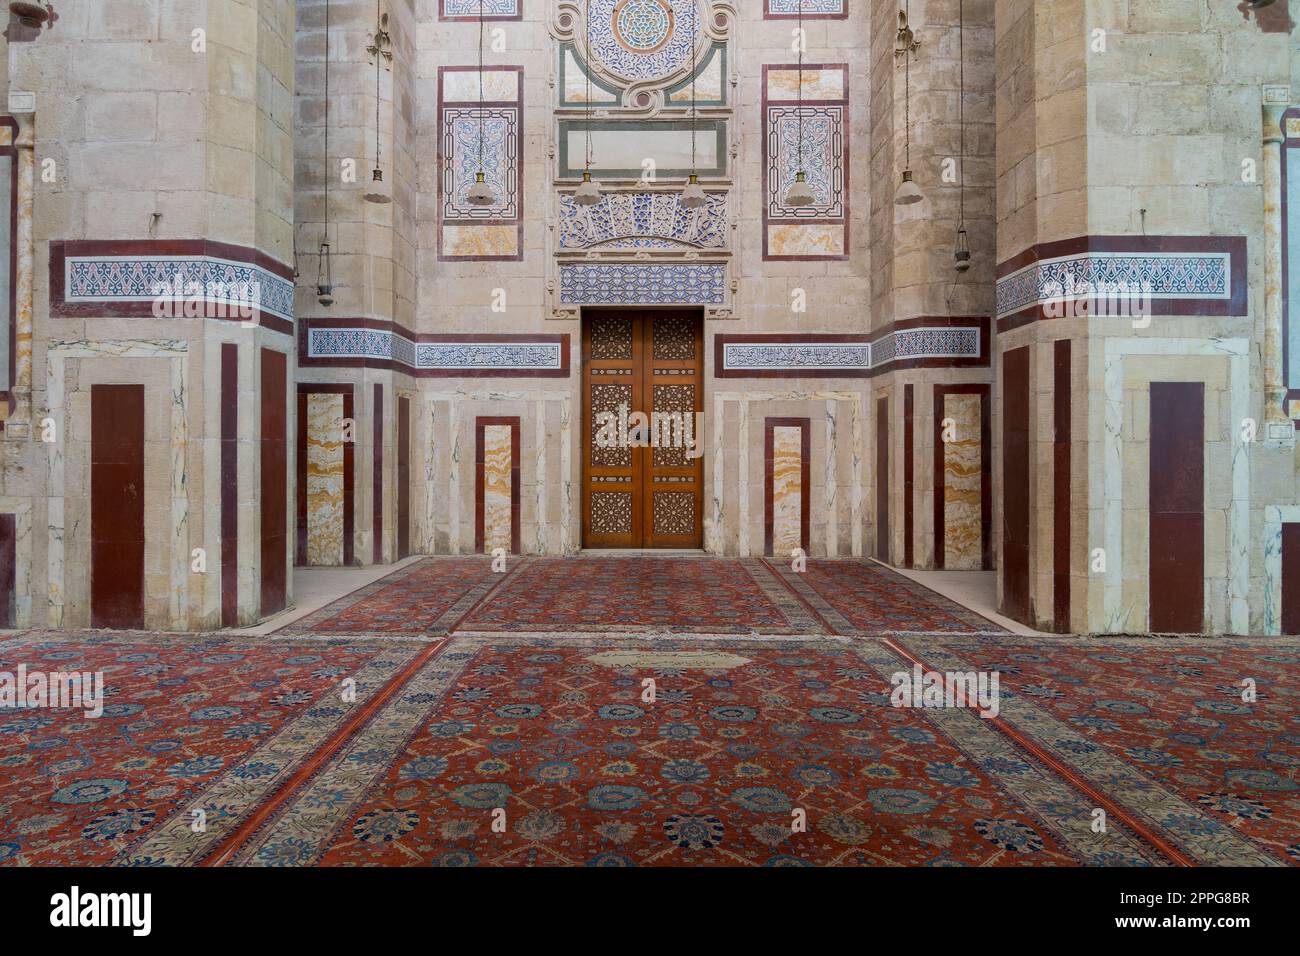 Old decorated stone wall, marble decorations and arabesque decorated wooden door, al Refai Mosque Stock Photo